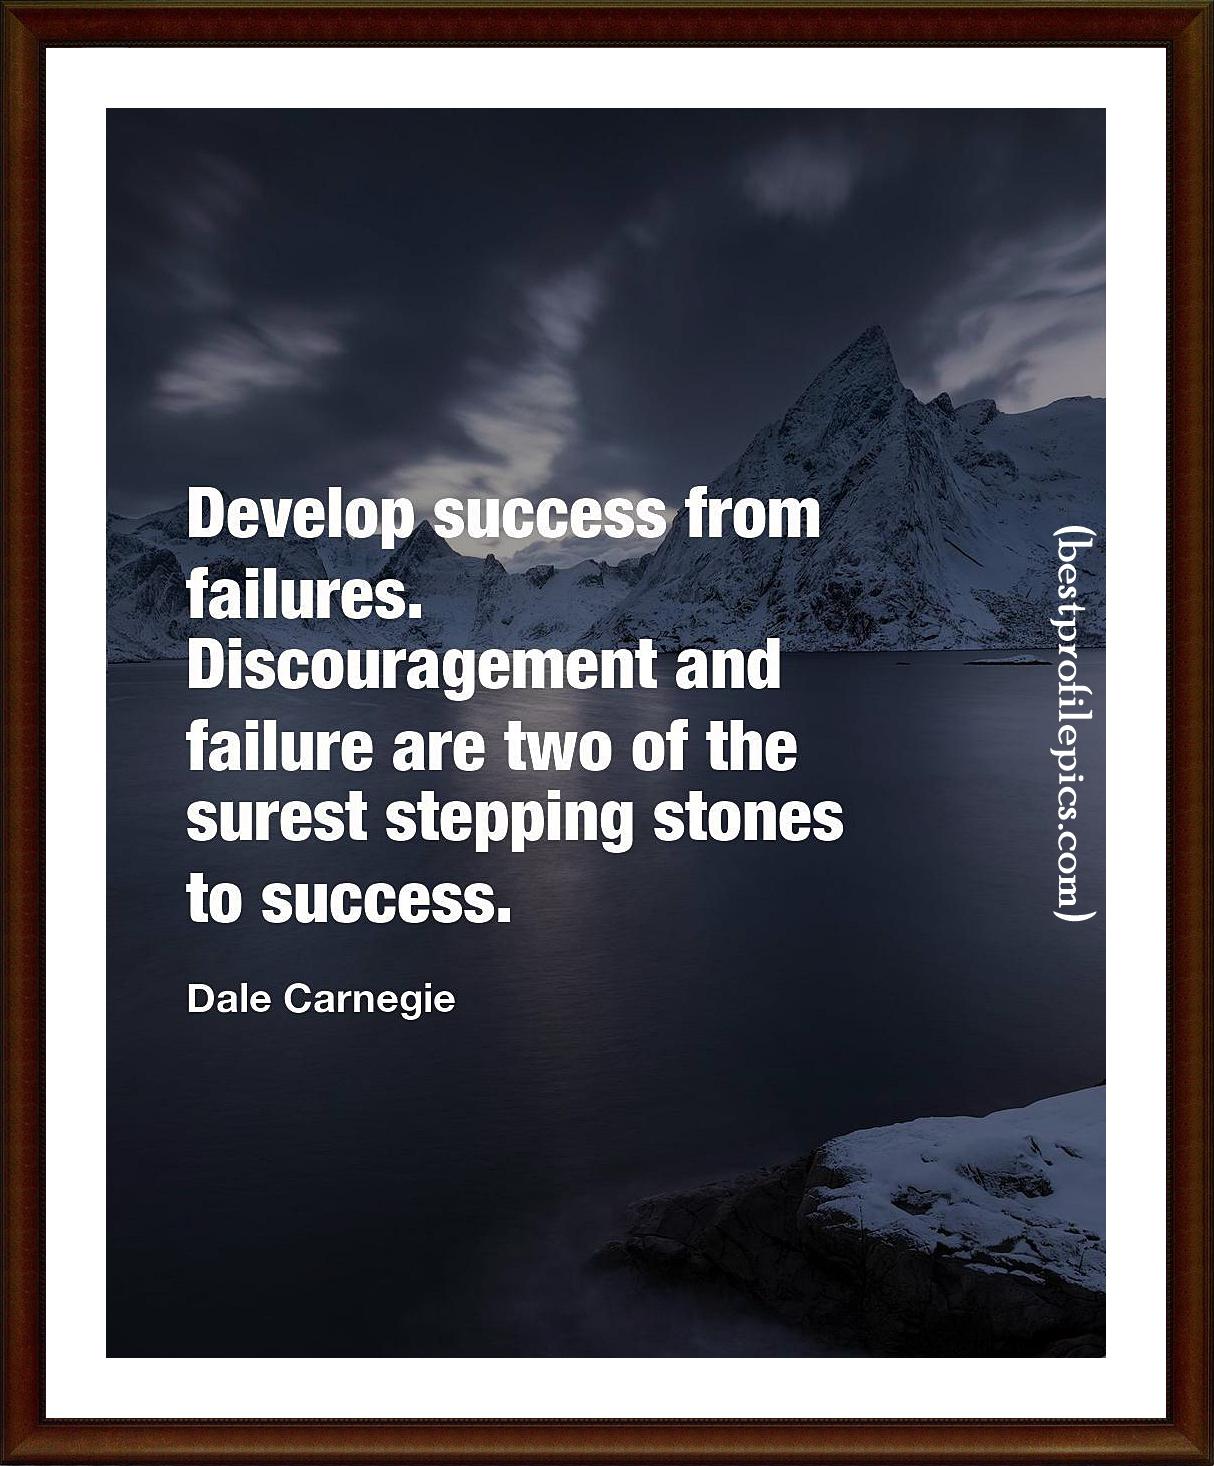 dale carnegie quotes for inspiration